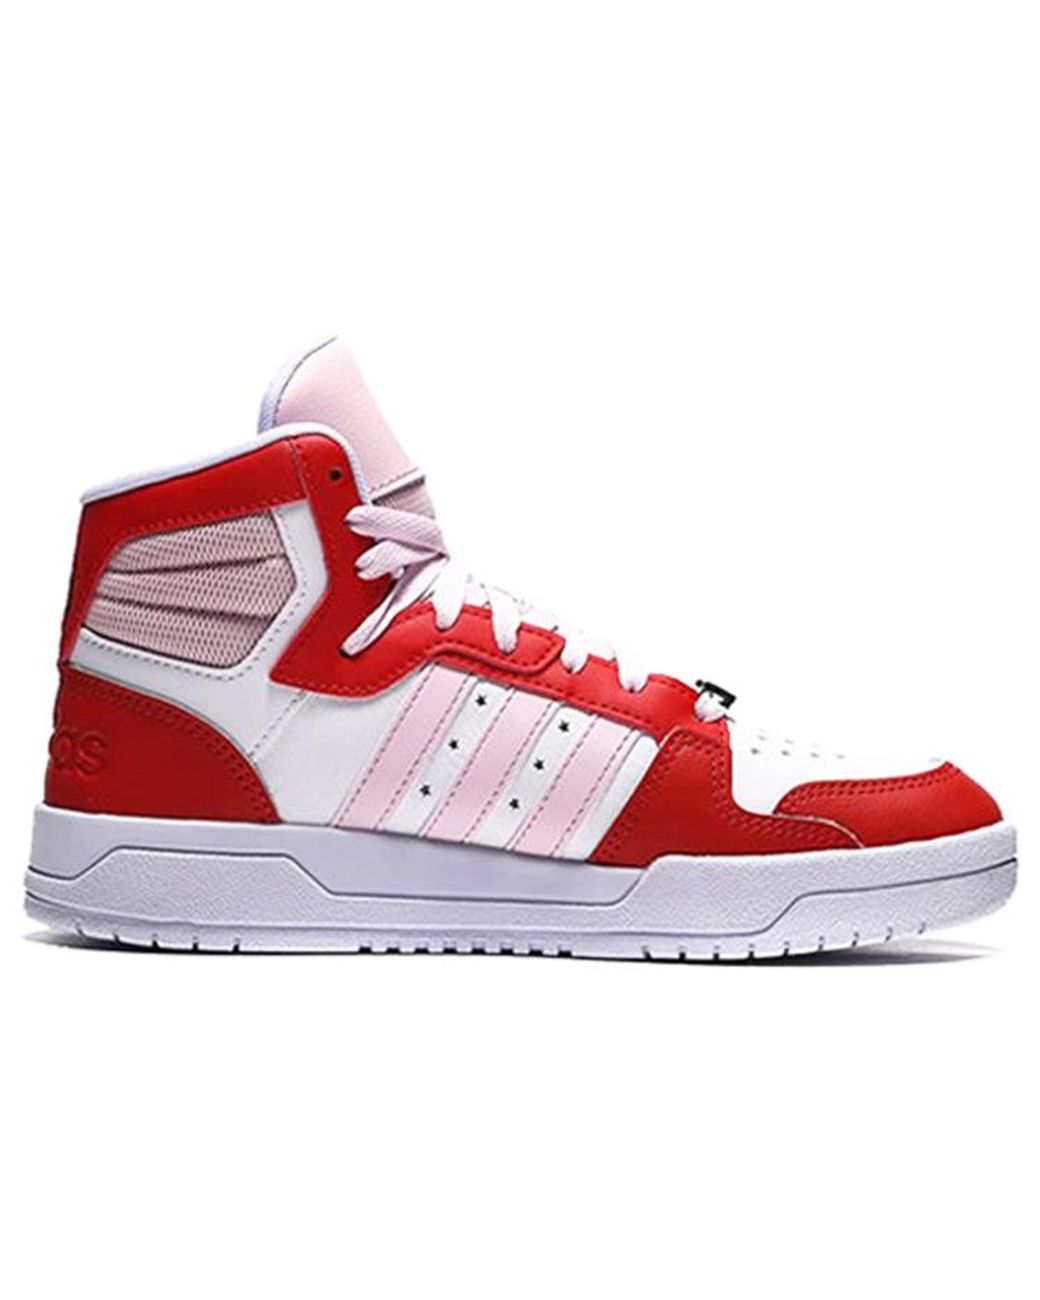 Adidas Neo Entrap Mid Shoes White/red/pink | Lyst